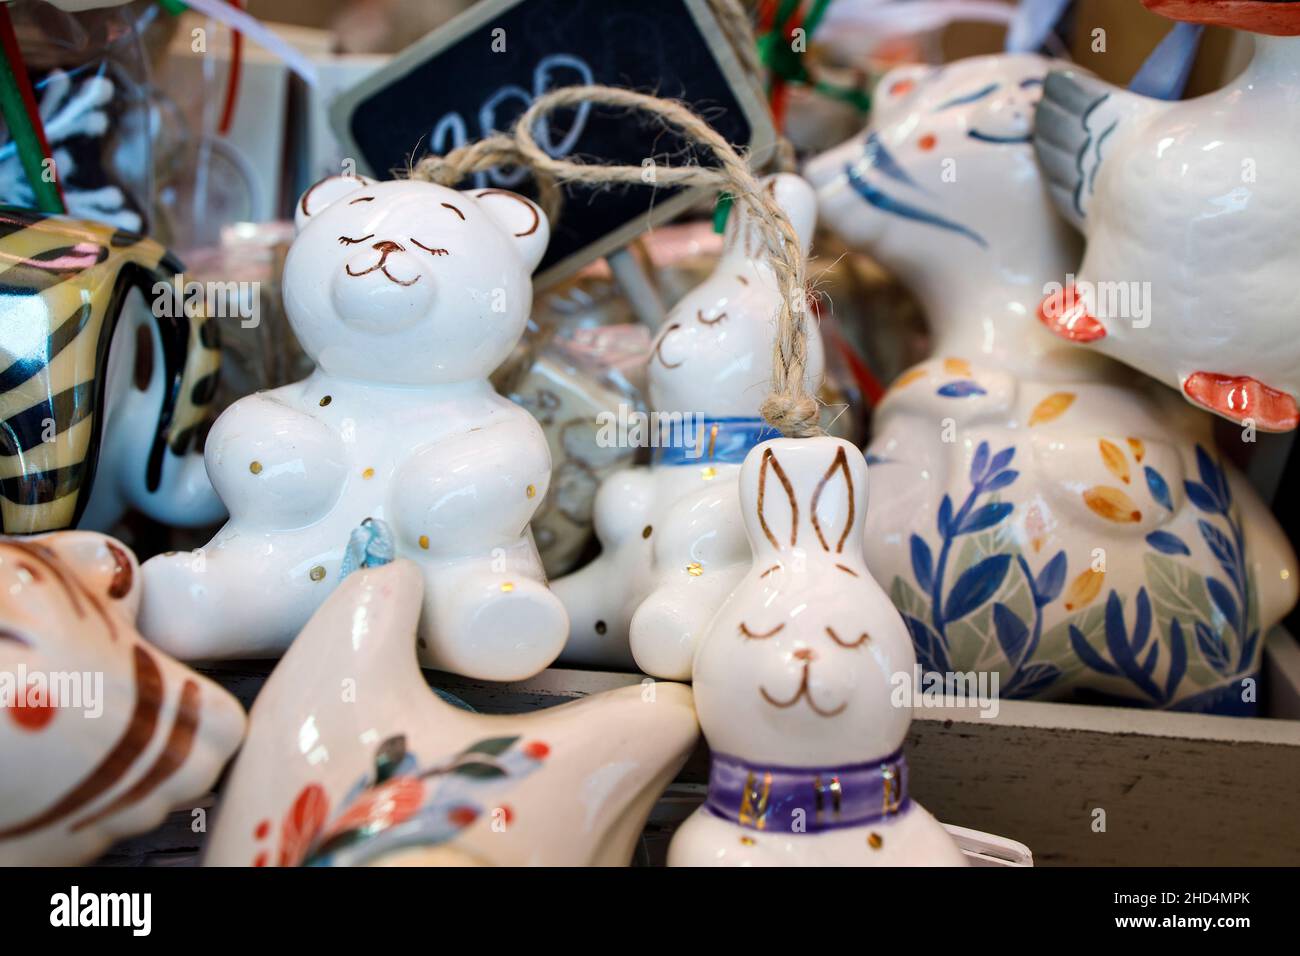 Moscow, Russia - 20 December 2021, Glass Christmas toys hares and bears for the Christmas tree at the fair Stock Photo